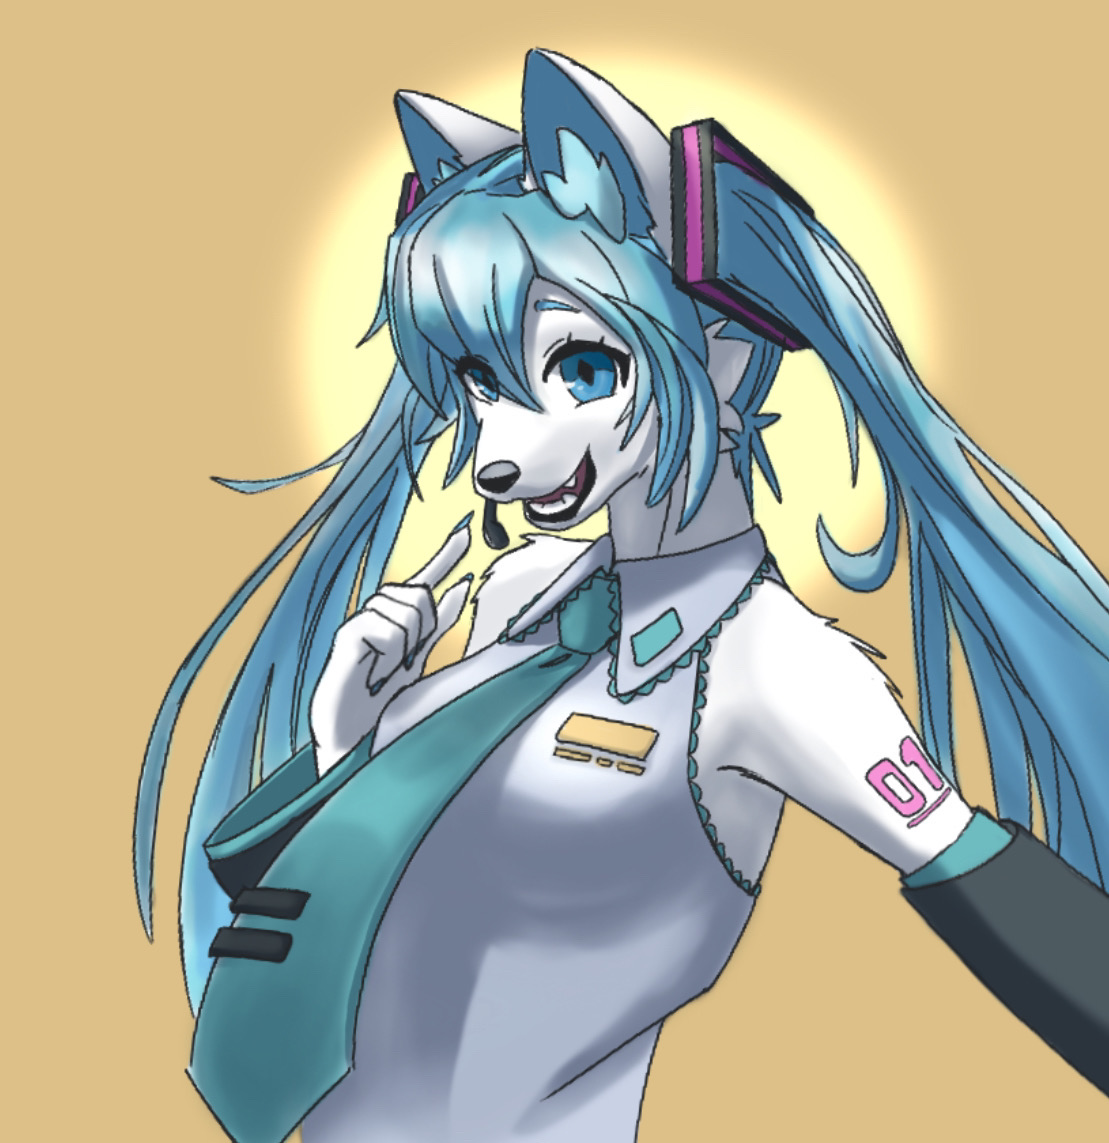 Happy Miku Day!! (Now in color!) by PatchWolf42 on DeviantArt